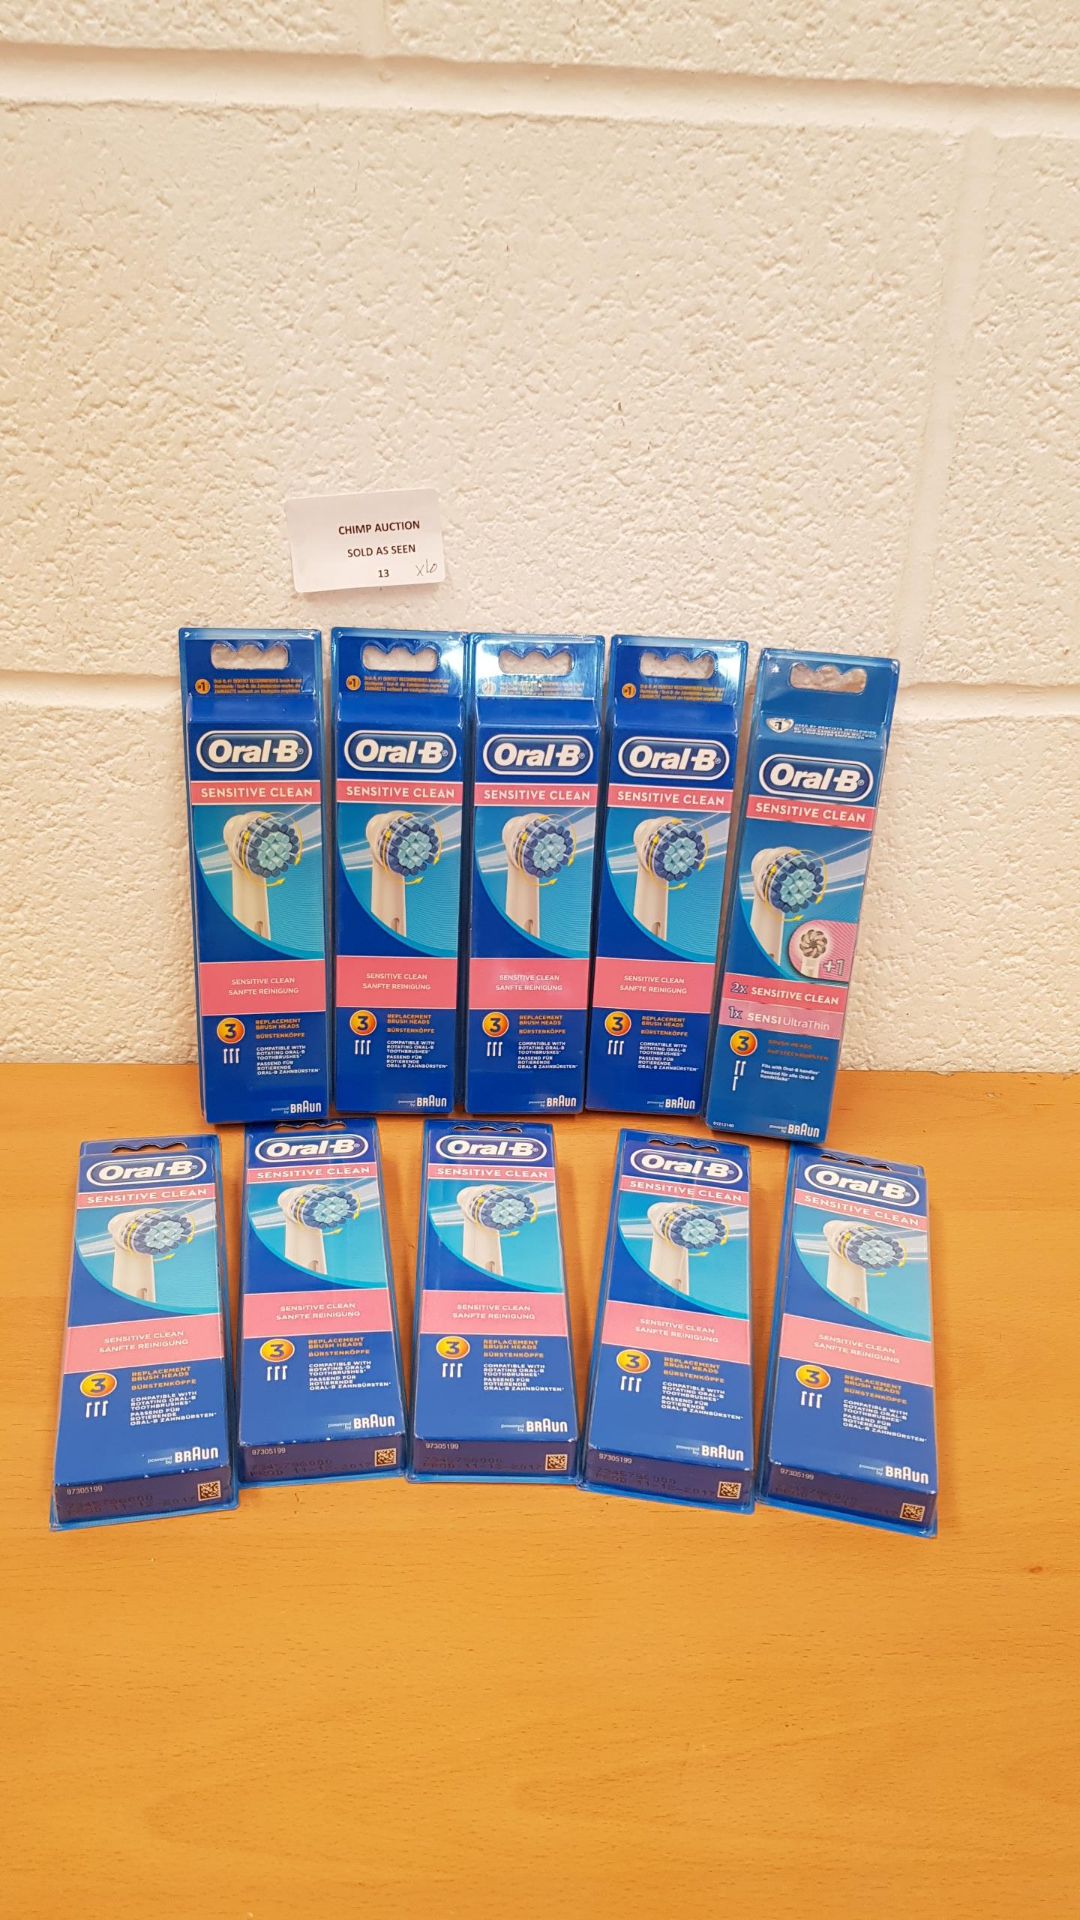 Joblot of 10X Brand new Oral-B -Replacement Brush Set of 3 RRP VALUE £200.